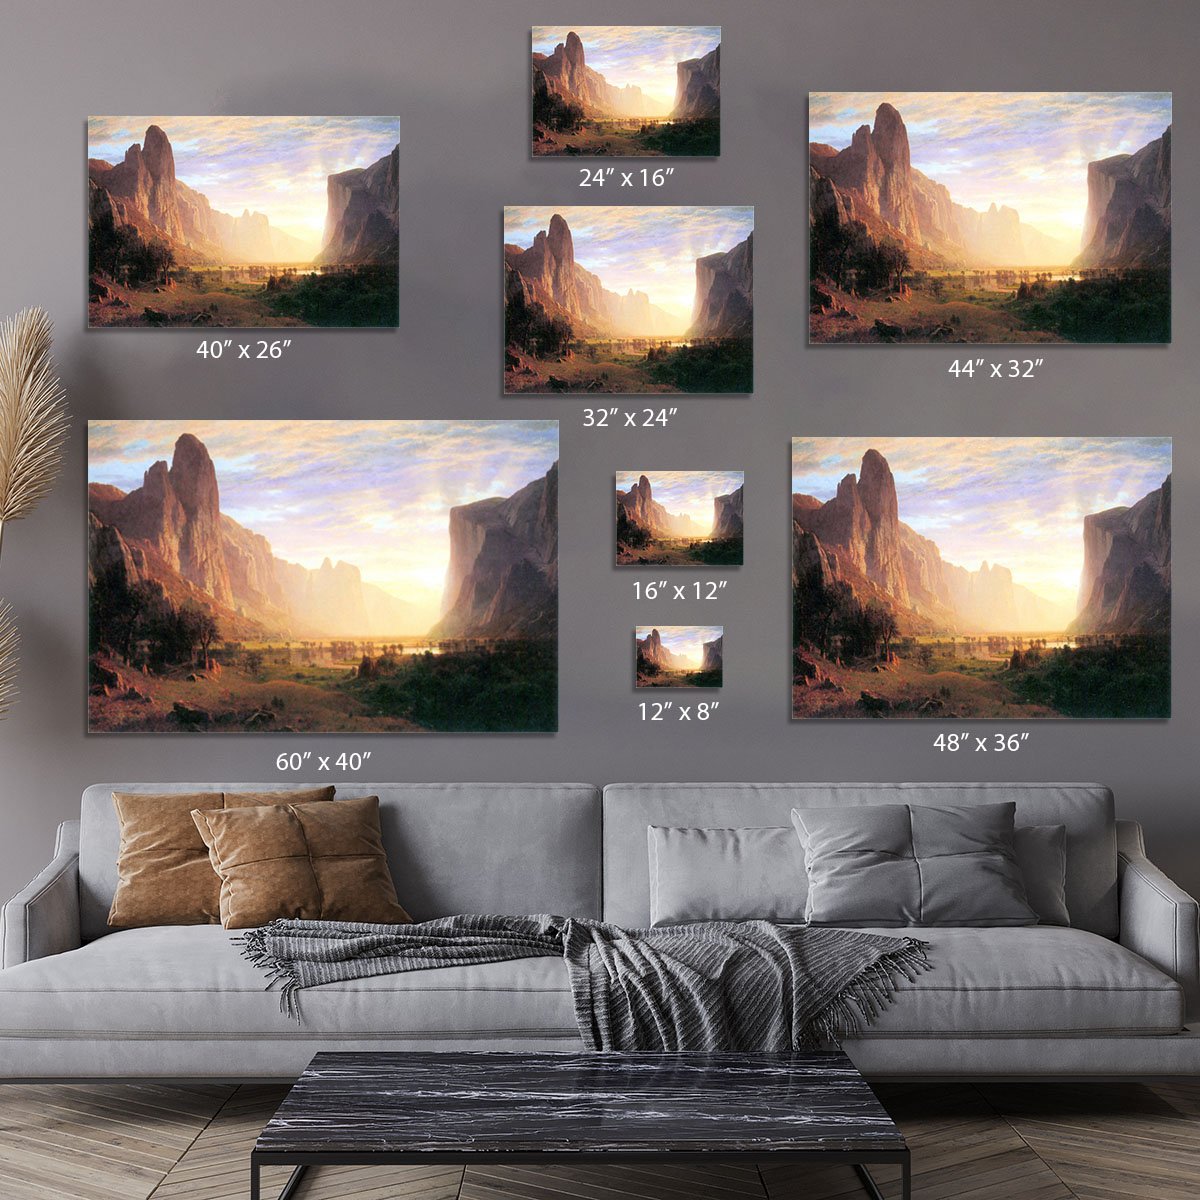 Yosemite Valley 3 by Bierstadt Canvas Print or Poster